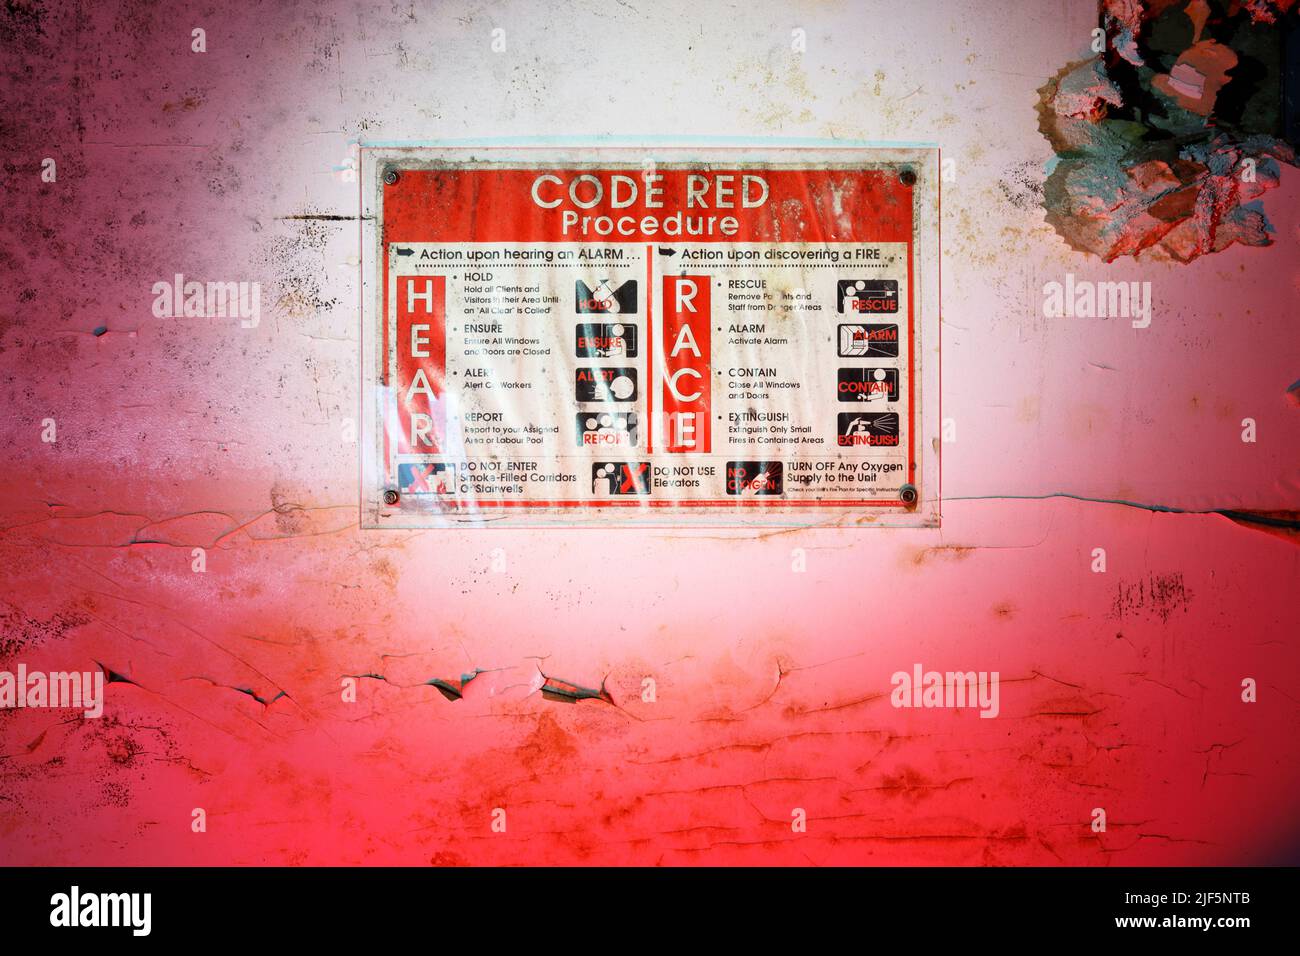 A code red placard on the wall. Stock Photo